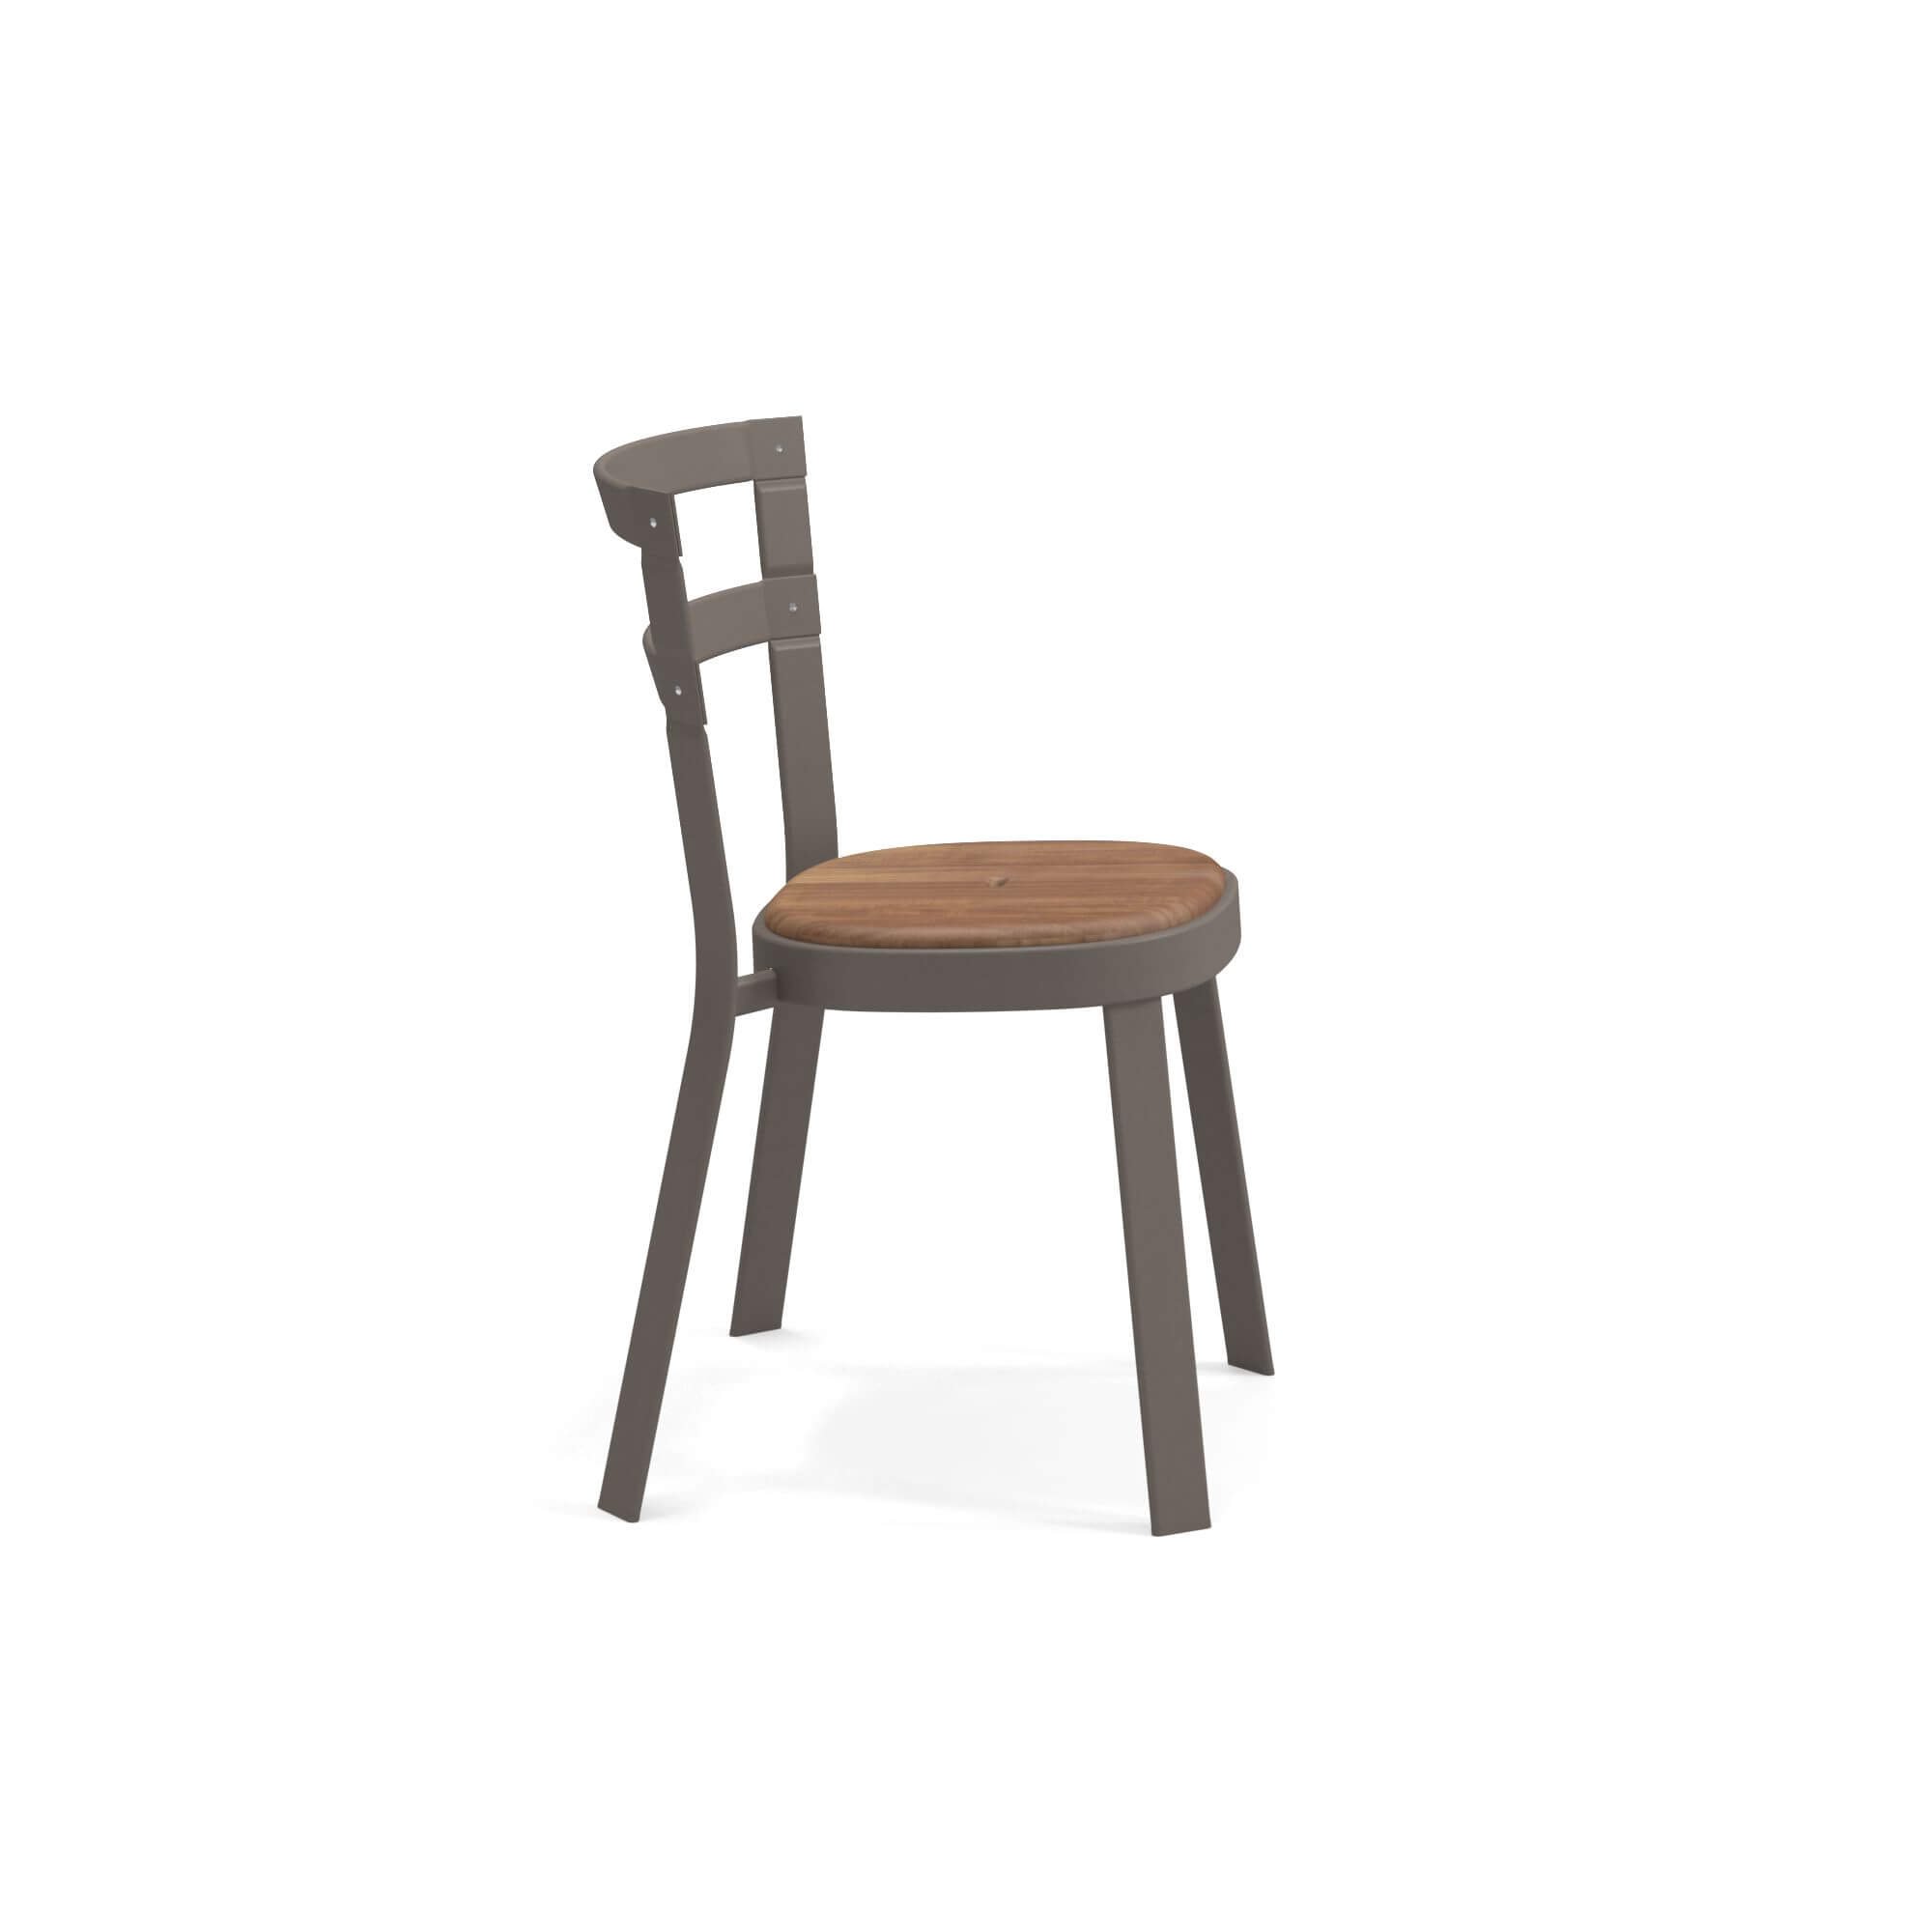 Thor 655 Chair from Emu, designed by Chiaramonte and Marin